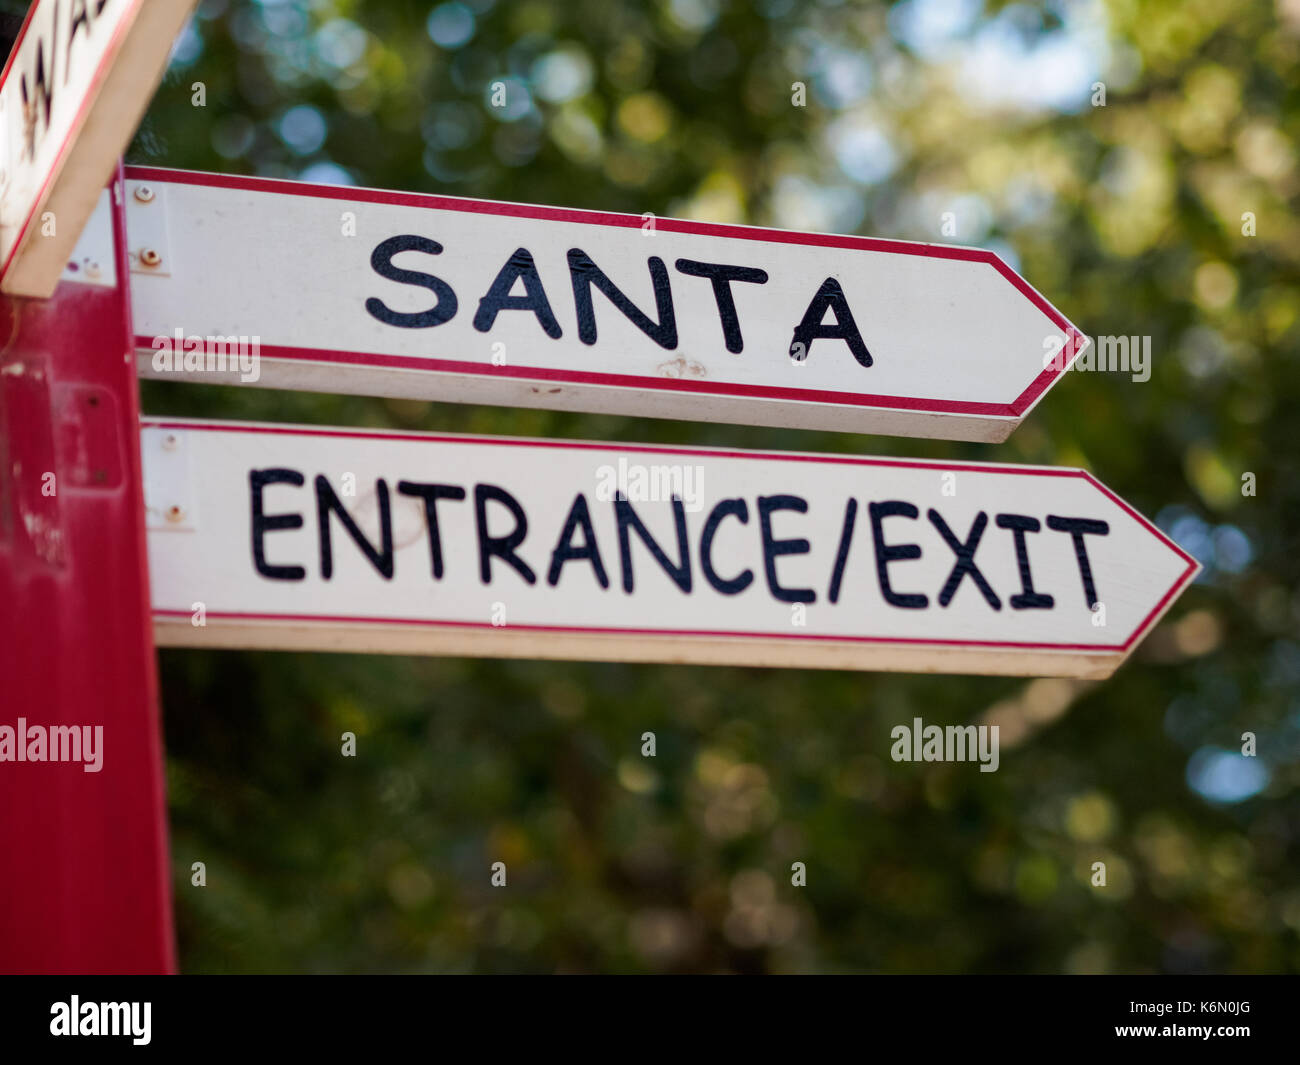 A signpost showing directions to meet Santa Claus depicting where Santa lives Stock Photo